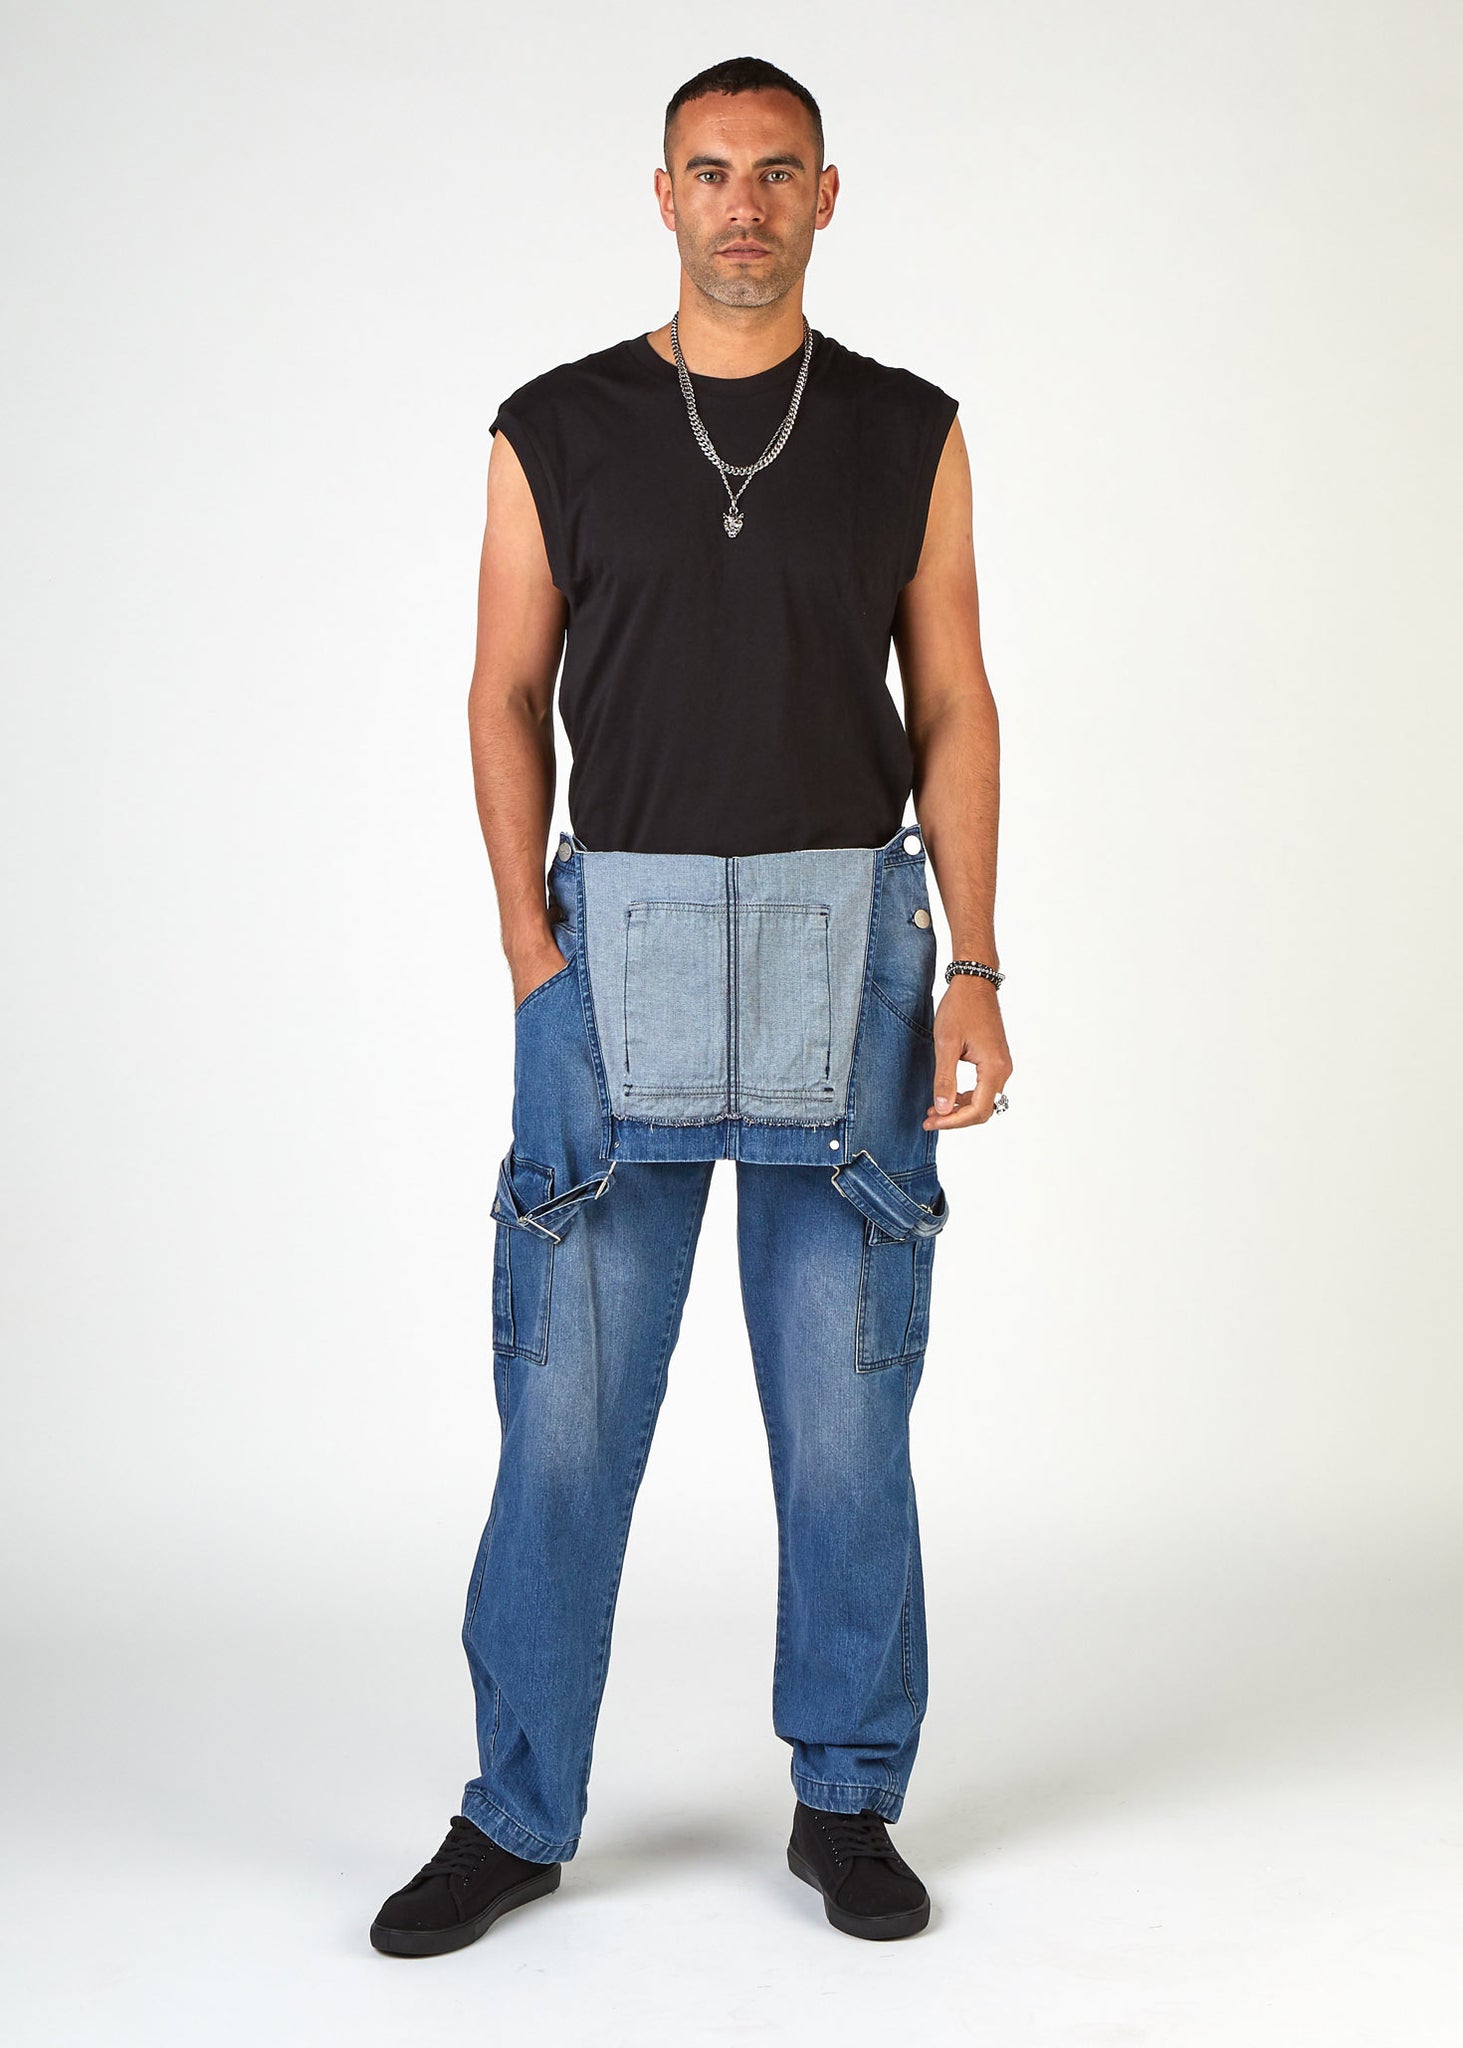 Full frontal bib-down view of loose-fit, stonewash bib-overalls from Dungarees Online, revealing black t-shirt.